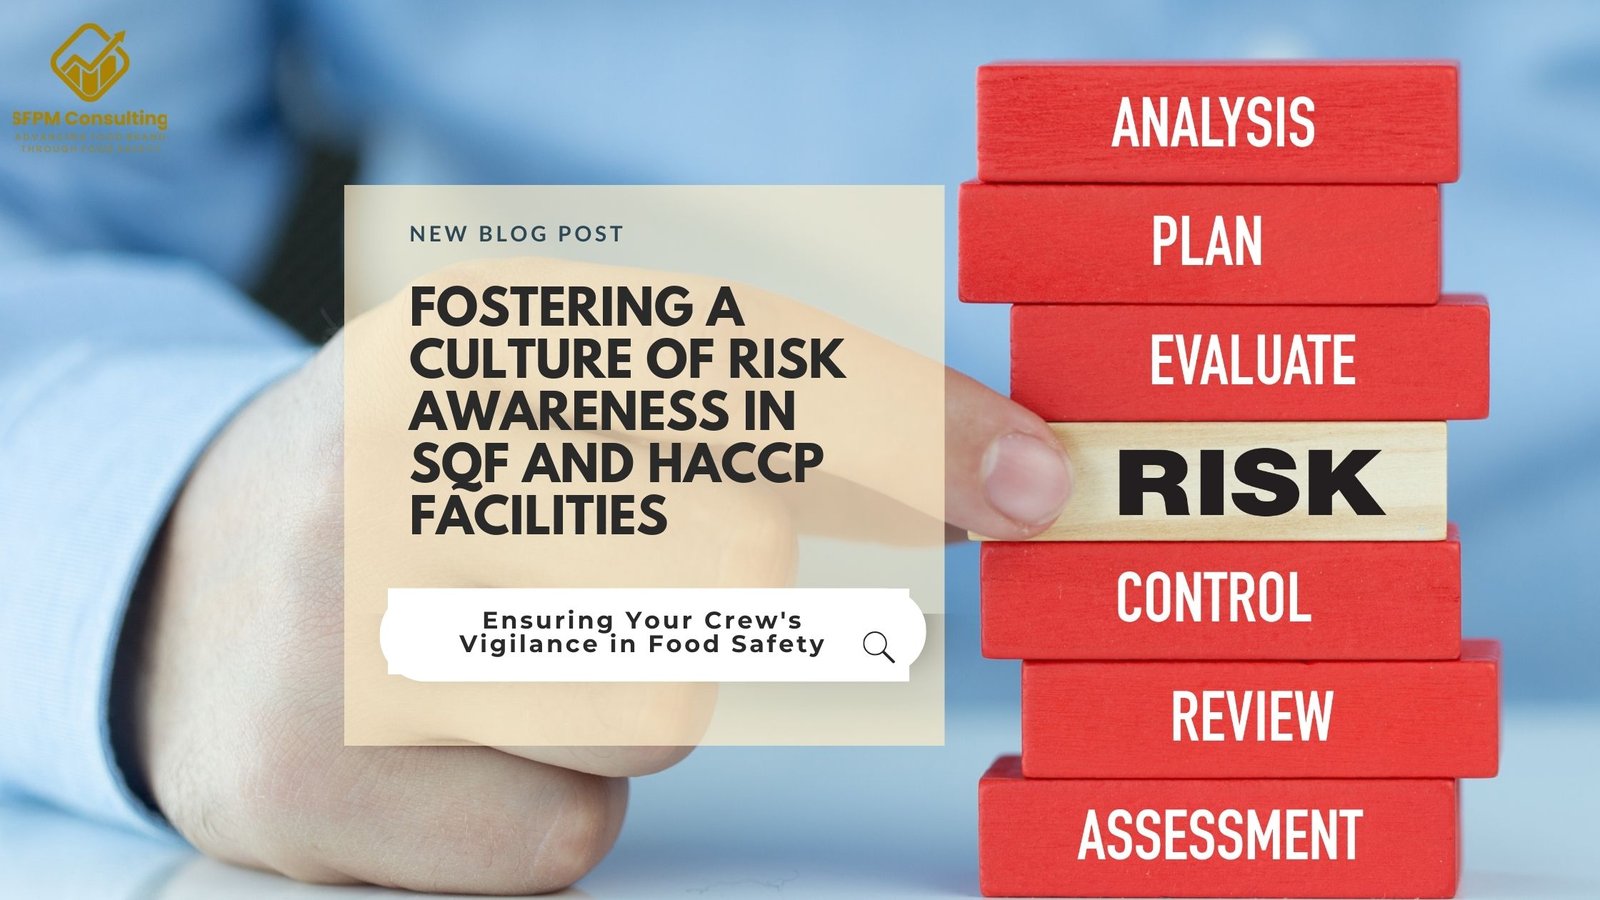 SFPM Consulting present Fostering a Culture of Risk Awareness in SQF and HACCP Facilities